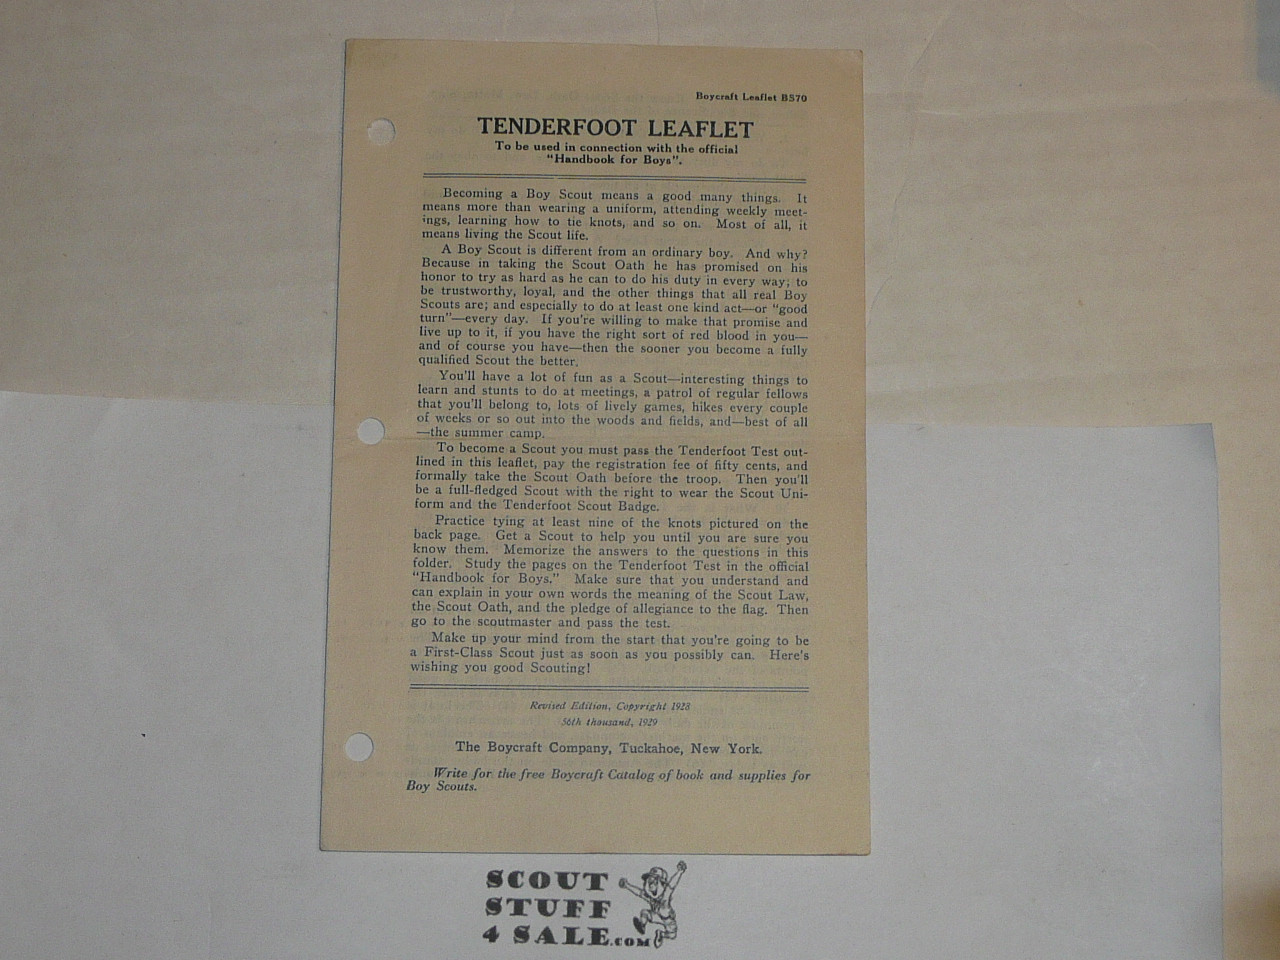 1929 Tenderfoot Leaflet, By The Boycraft Company, Approved by the BSA, Leaflet B570, RARE